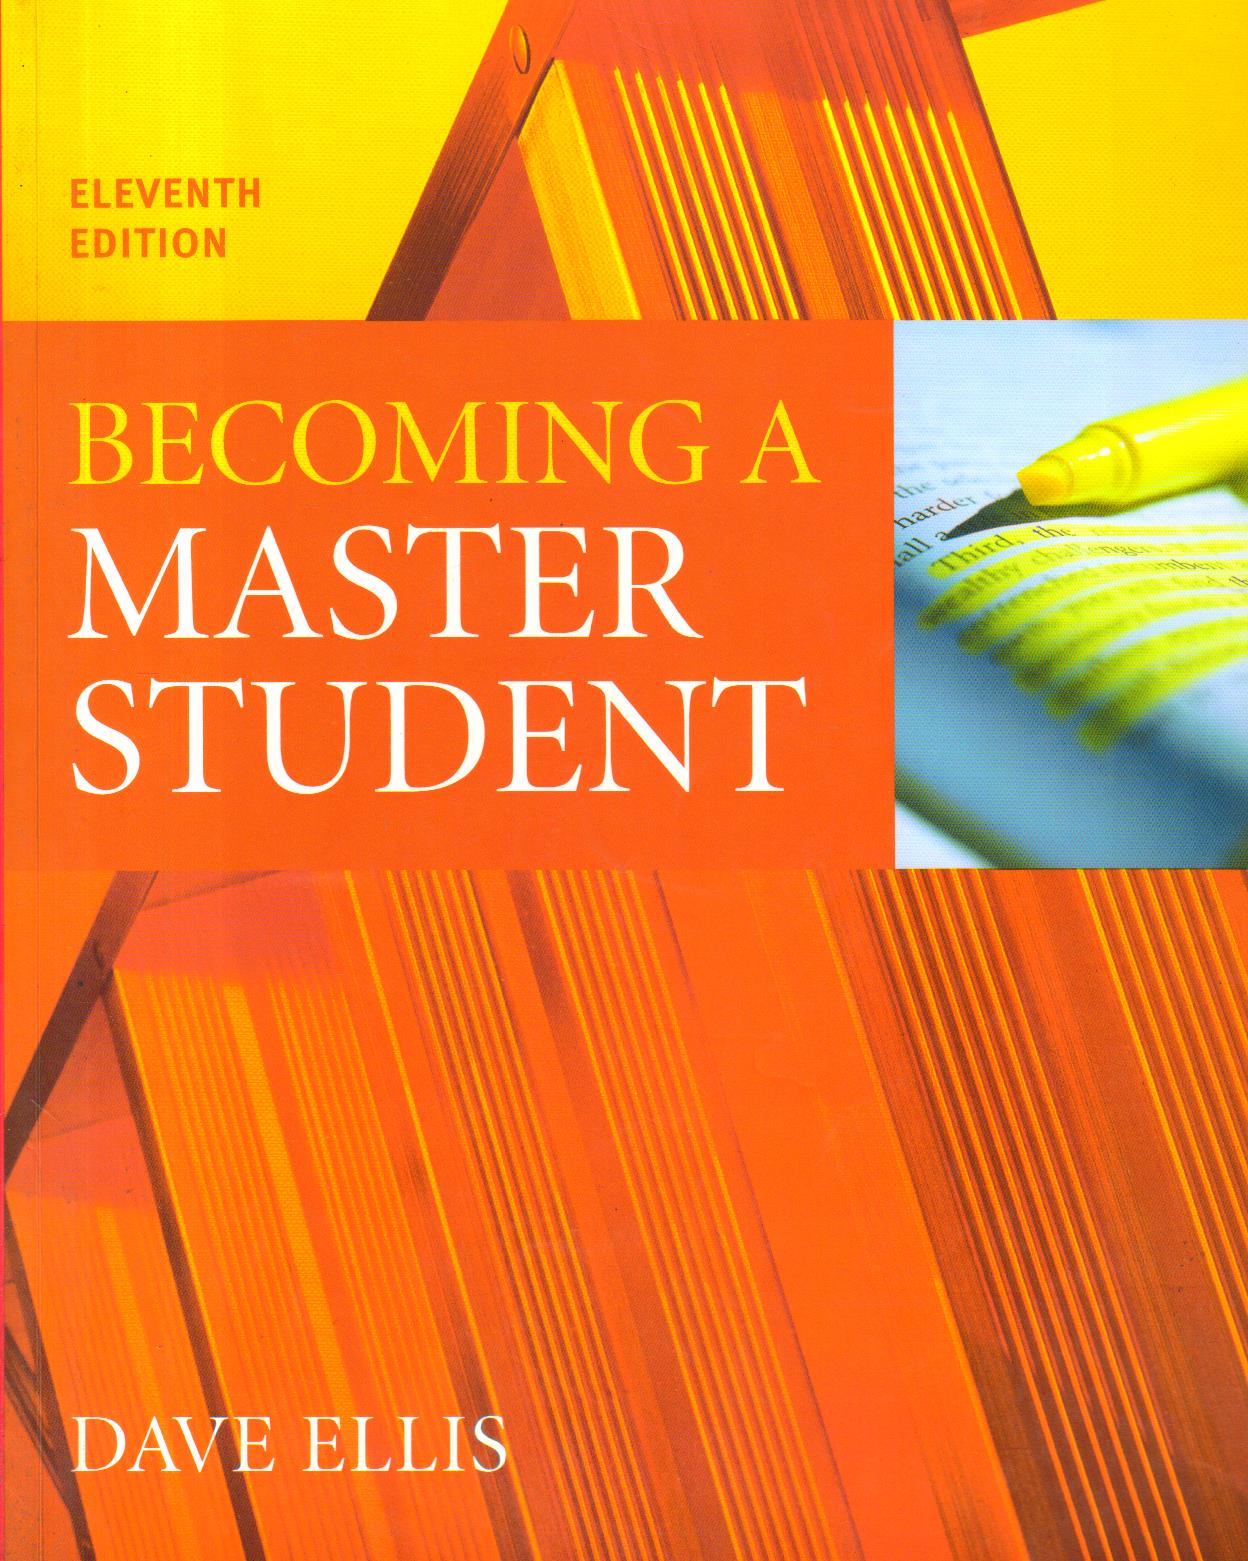 Becoming a Master Student.